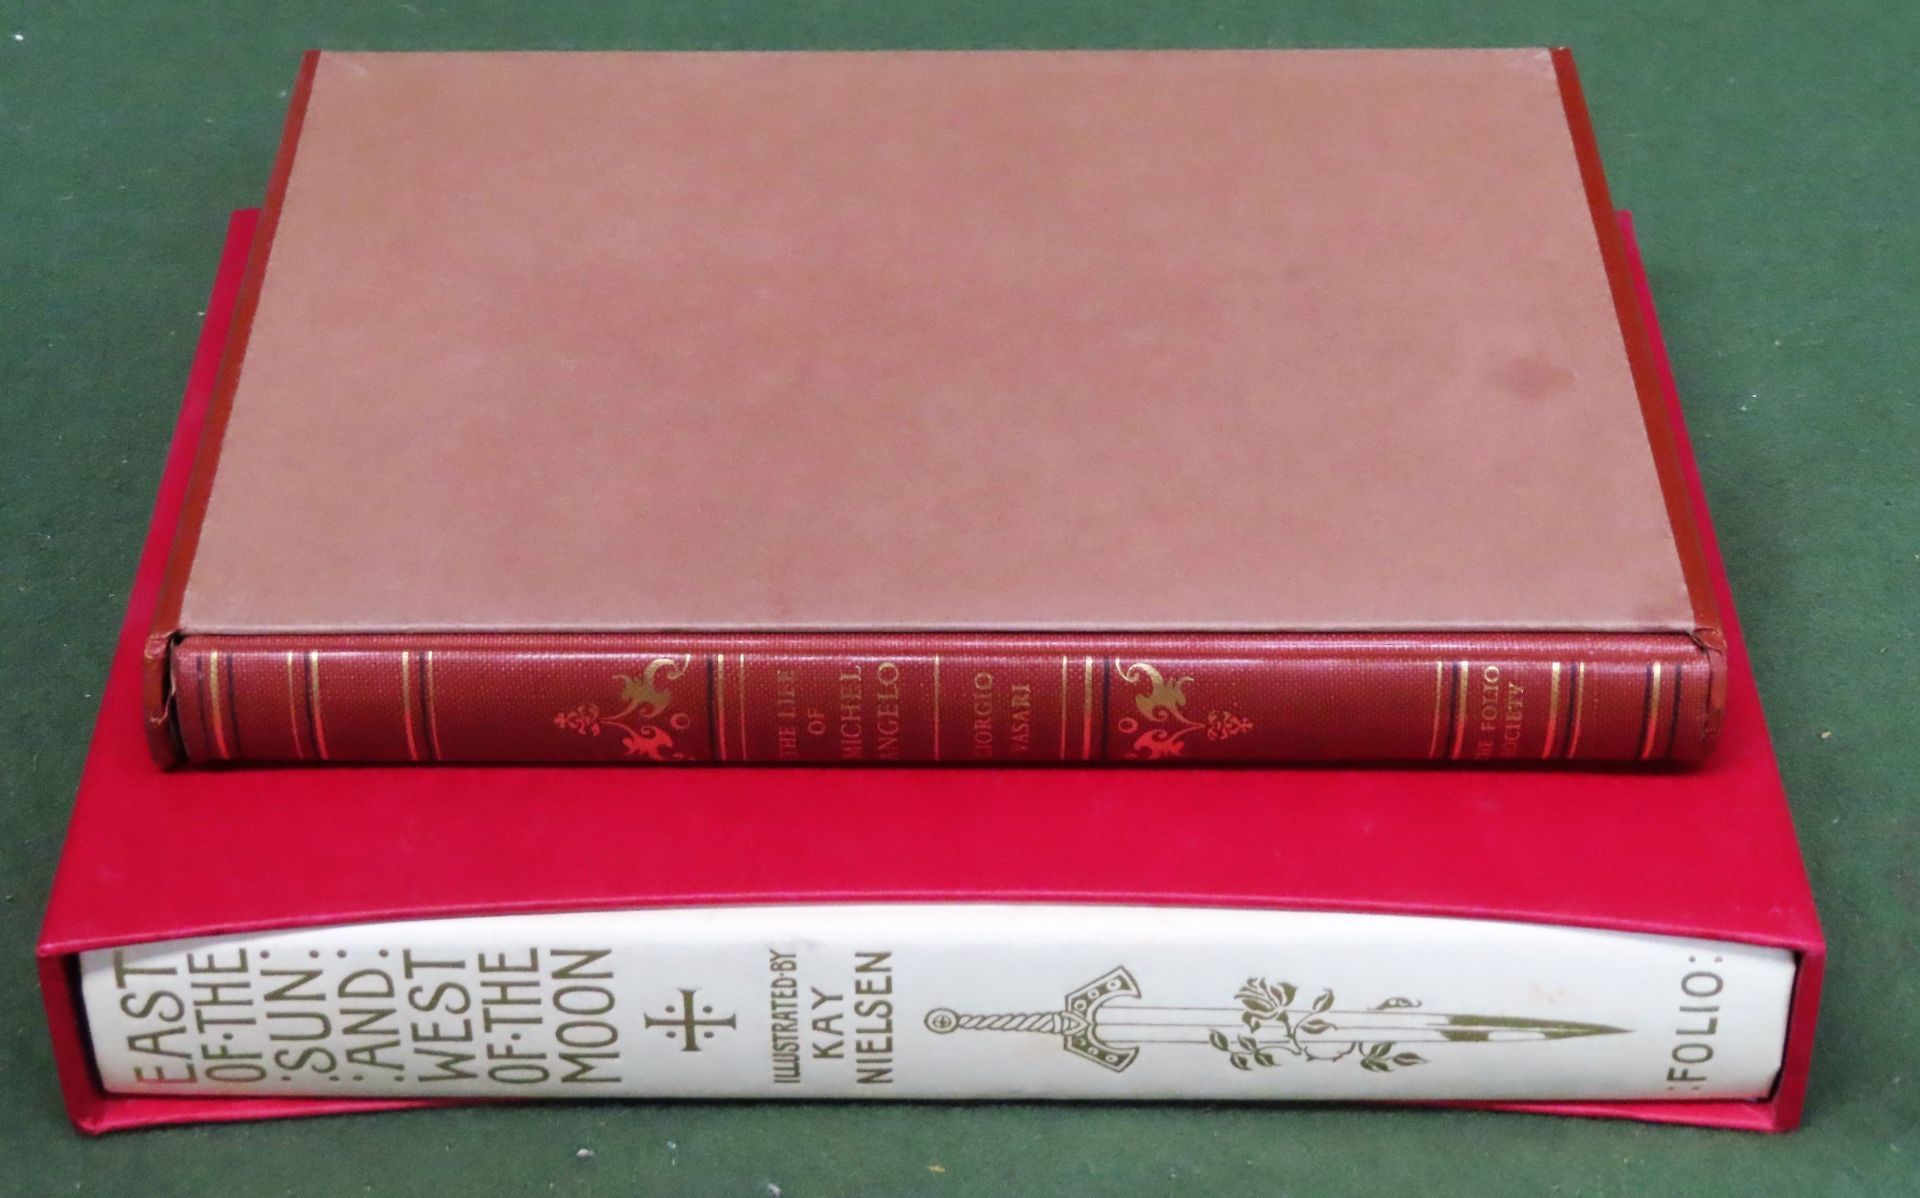 FOLIO SOCIETY TWO VOLUMES - EAST OF THE SUN AND WEST OF THE MOON & THE LIFE OF MICHAELANGELO